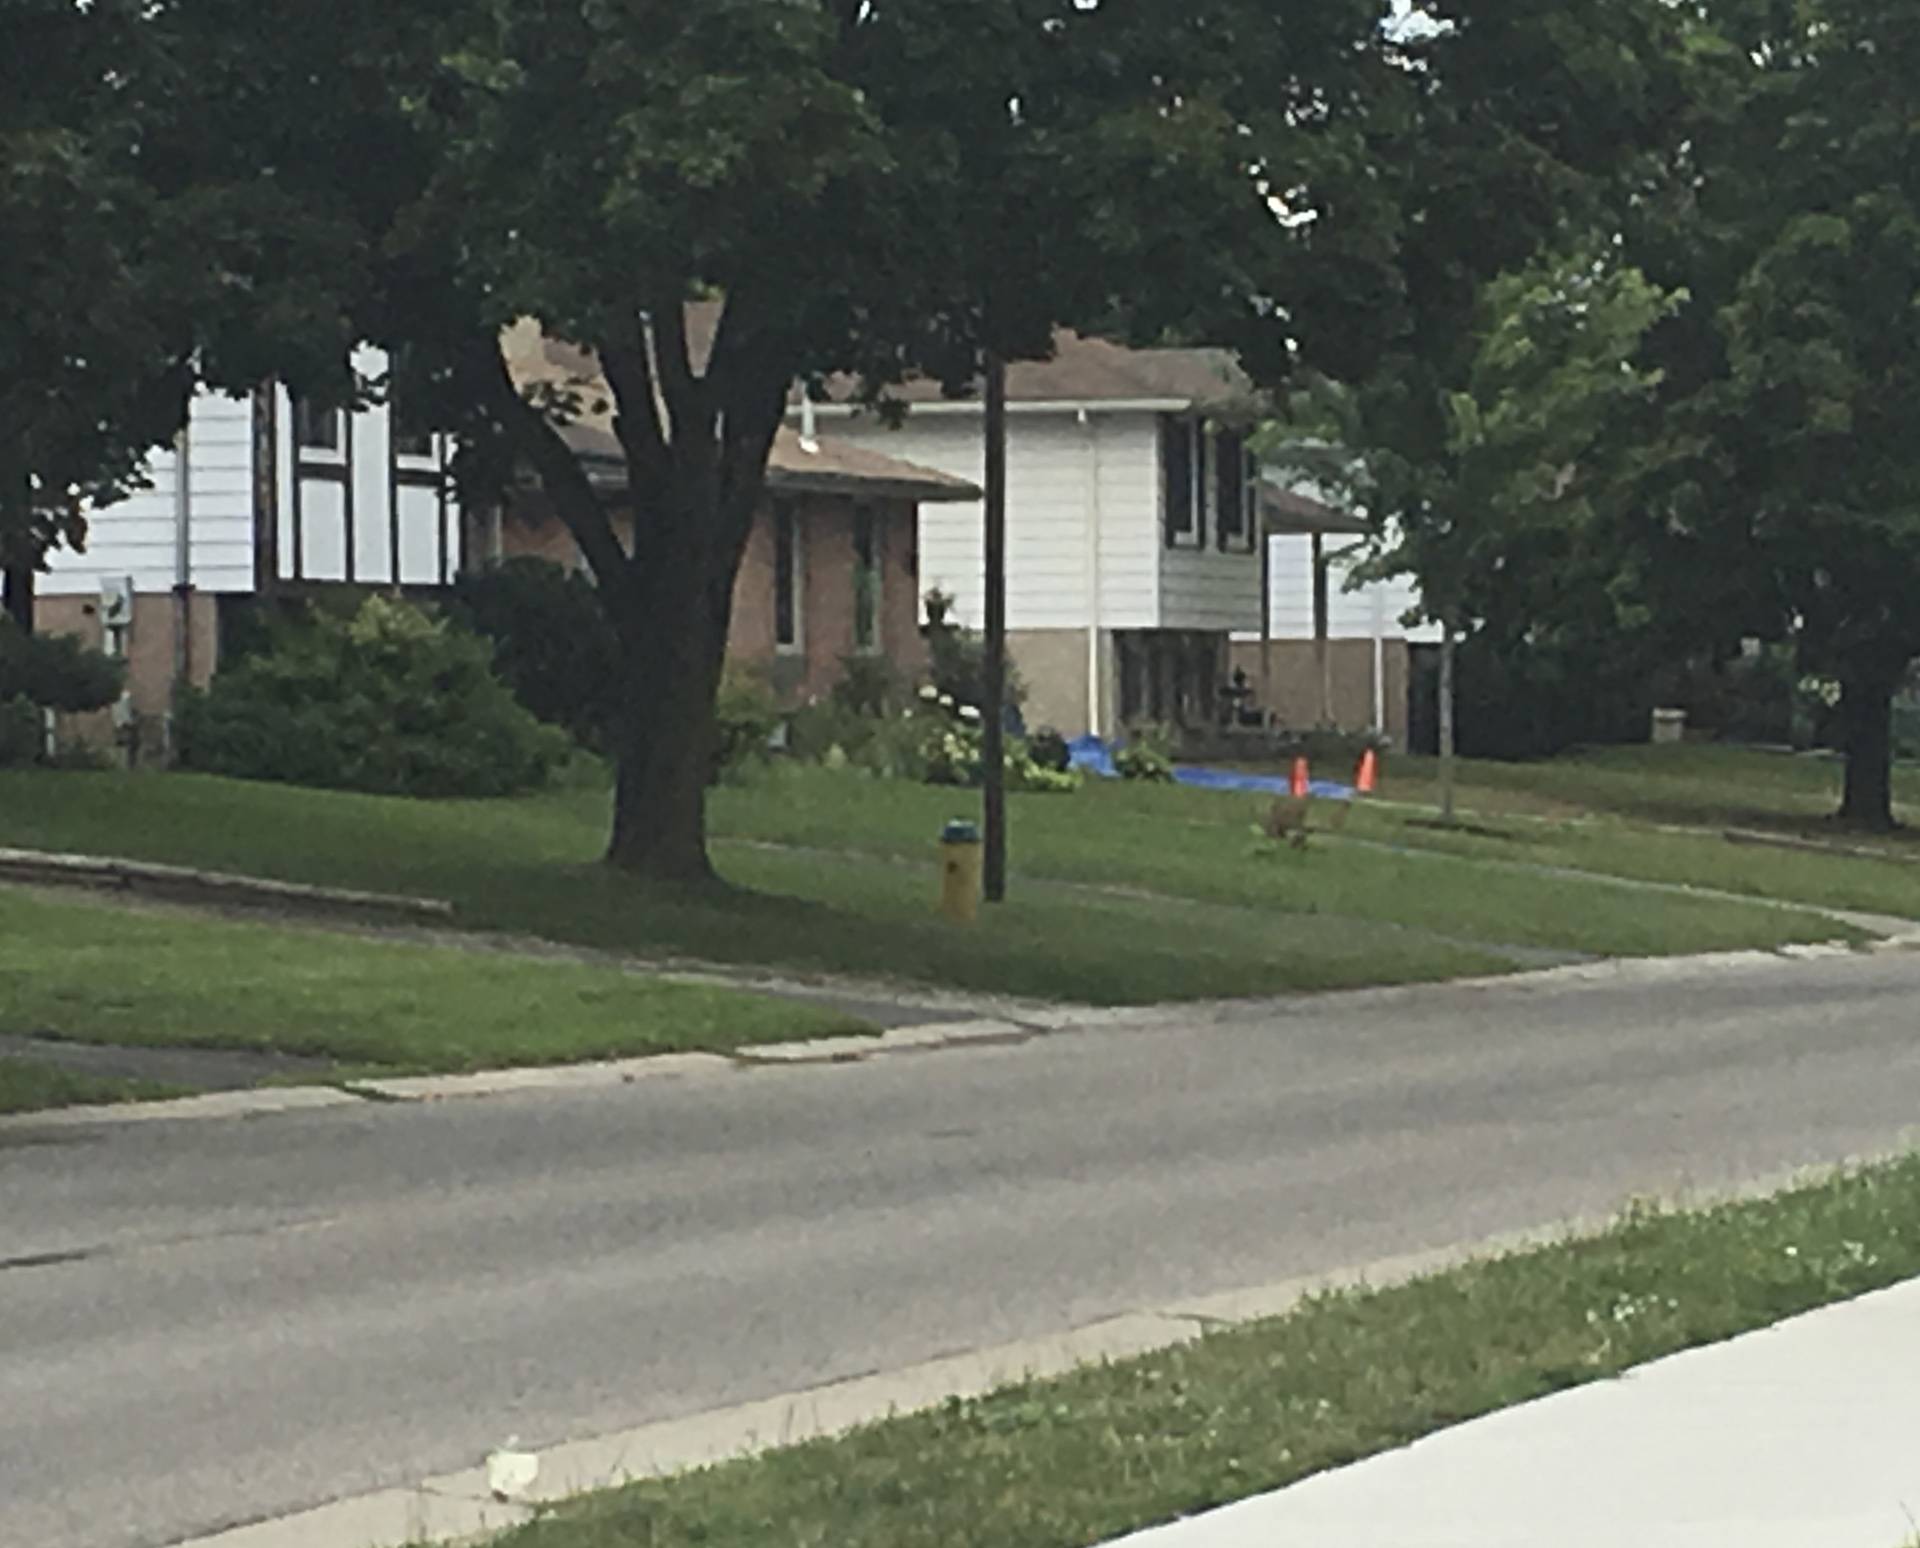 Red cones and a tarp are seen outside a home believed to be the residence of Aaron Driver, who had indicated he planned to carry out an imminent rush-hour attack on a major Canadian city, in Strathroy